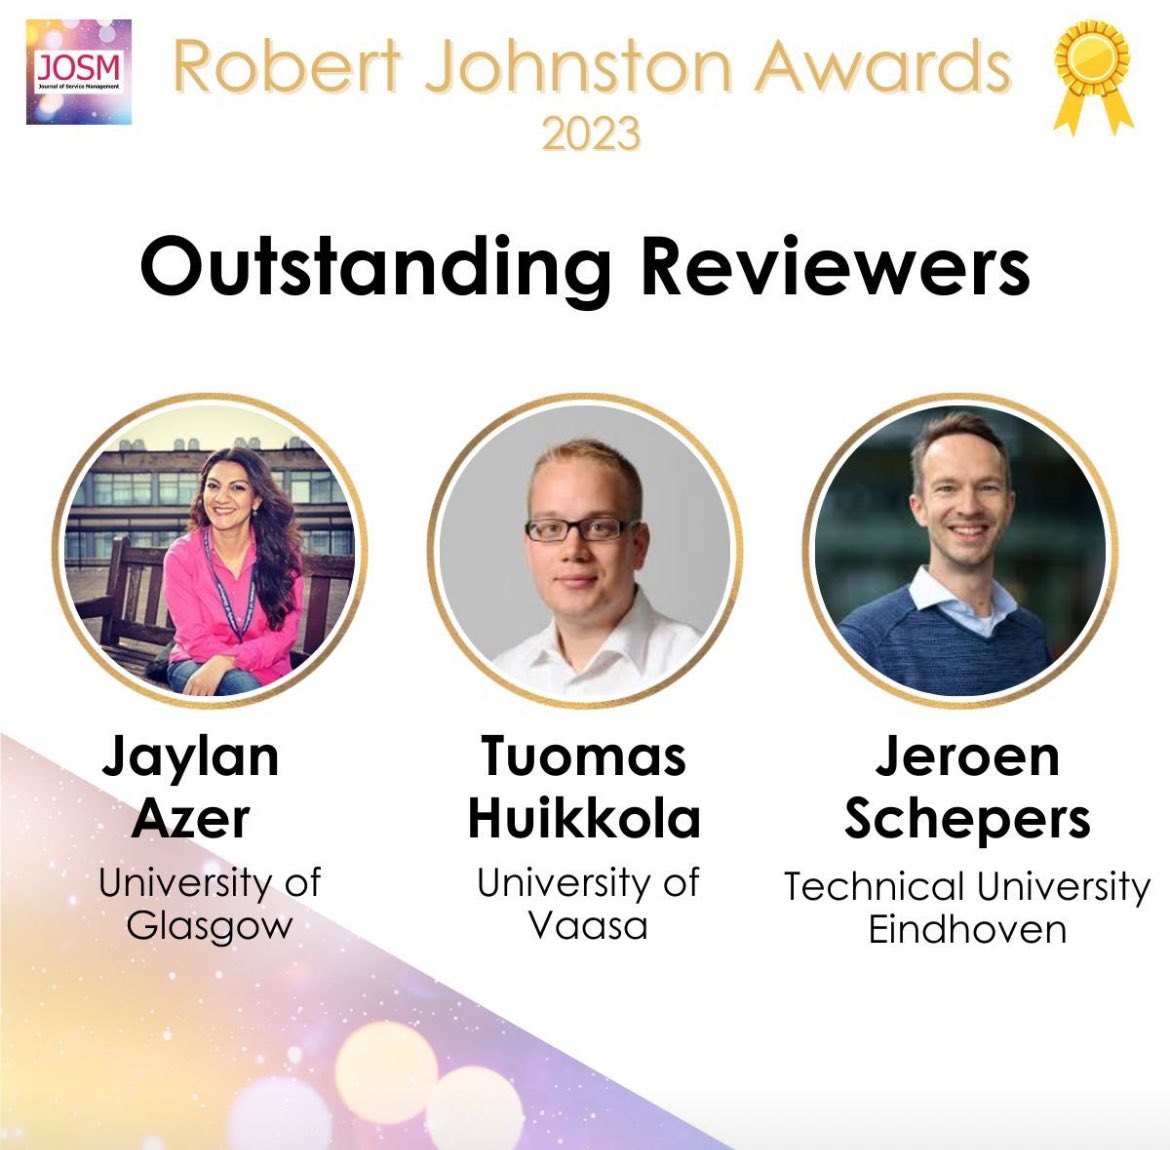 Thrilled to announce that I've been awarded the Robert Johnston Outstanding Reviewers Award! Big thanks to the editorial review board of the Journal of Service Management for recognizing my contributions. Here's to keeping the bar high for academic excellence 🥂@UofGlasgow